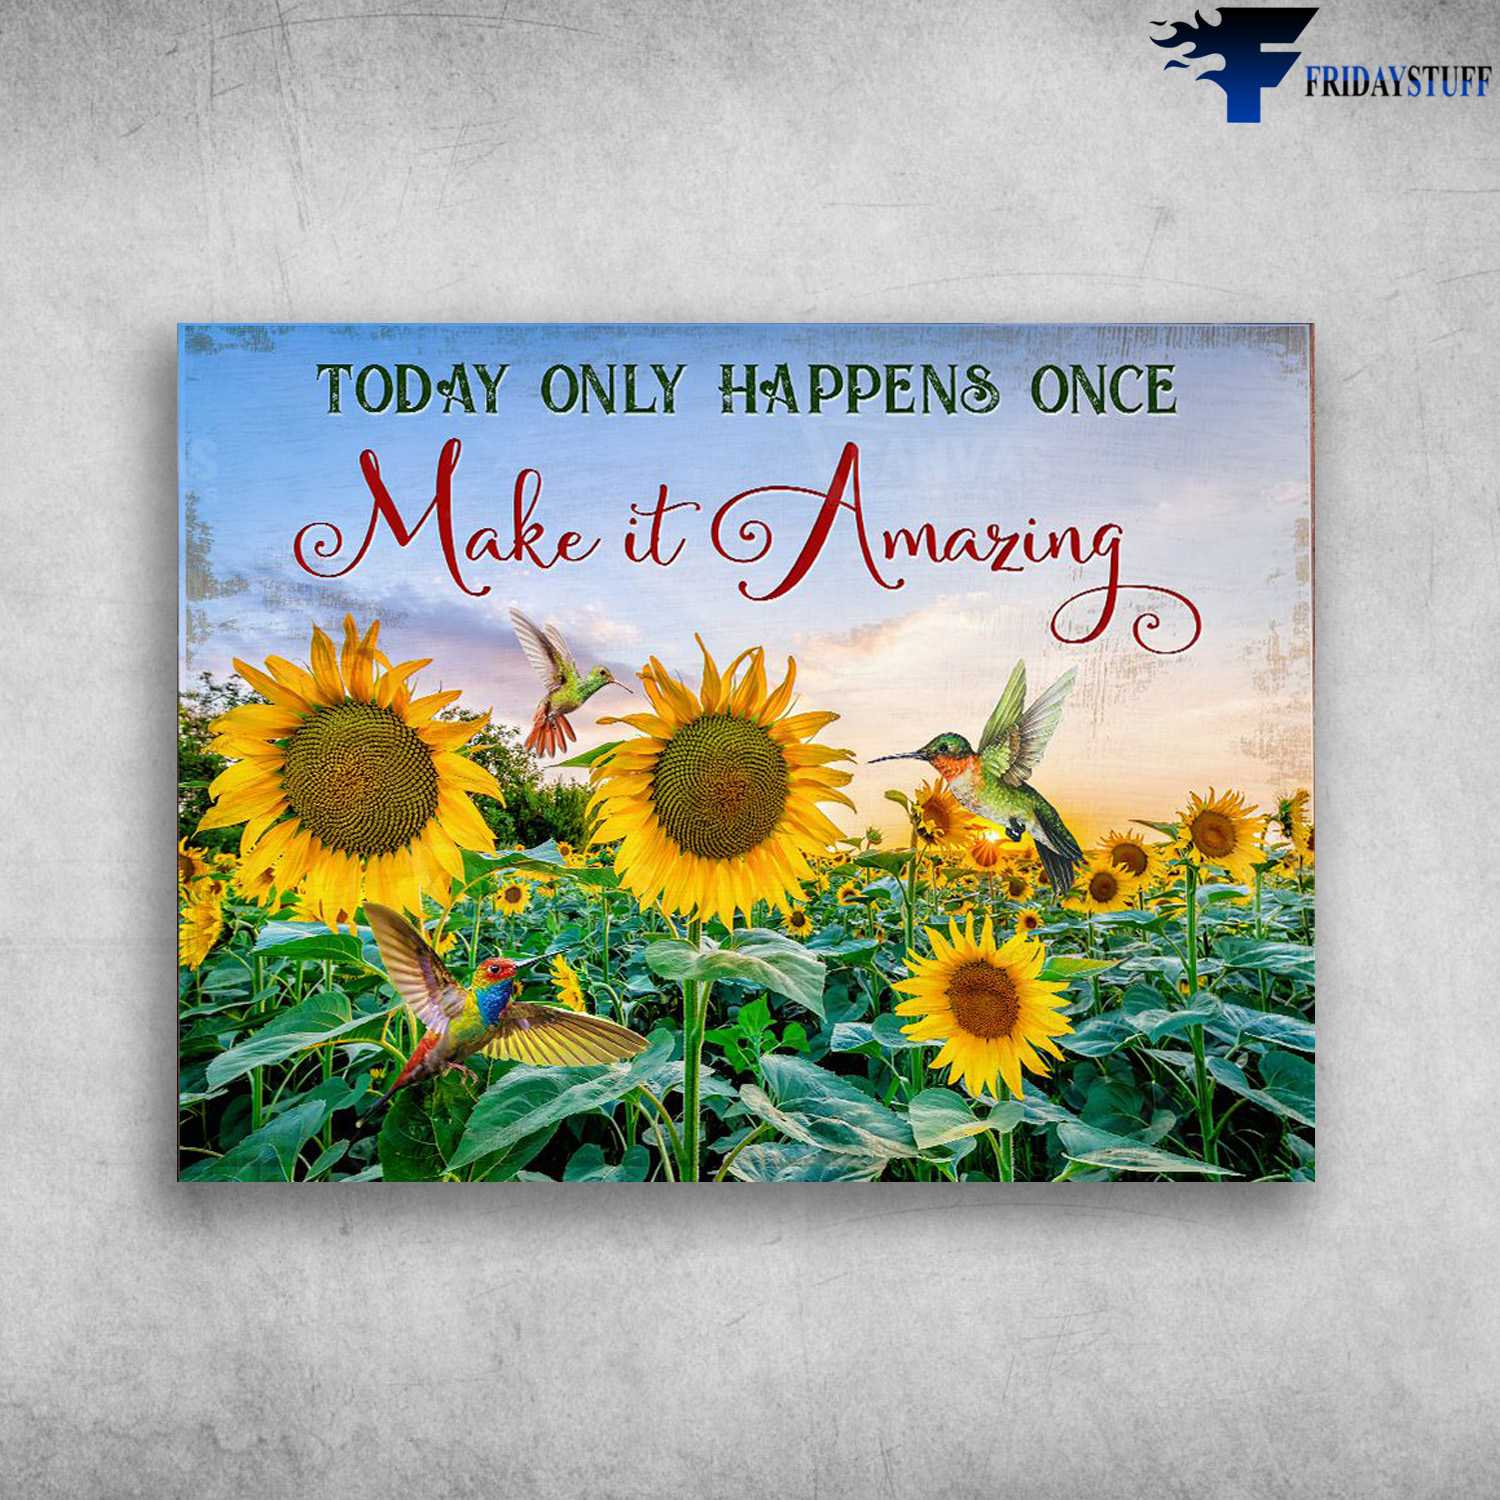 Hummingbird Flower, Sunflower Poster, Today Only Happens Once, Make It Amazing